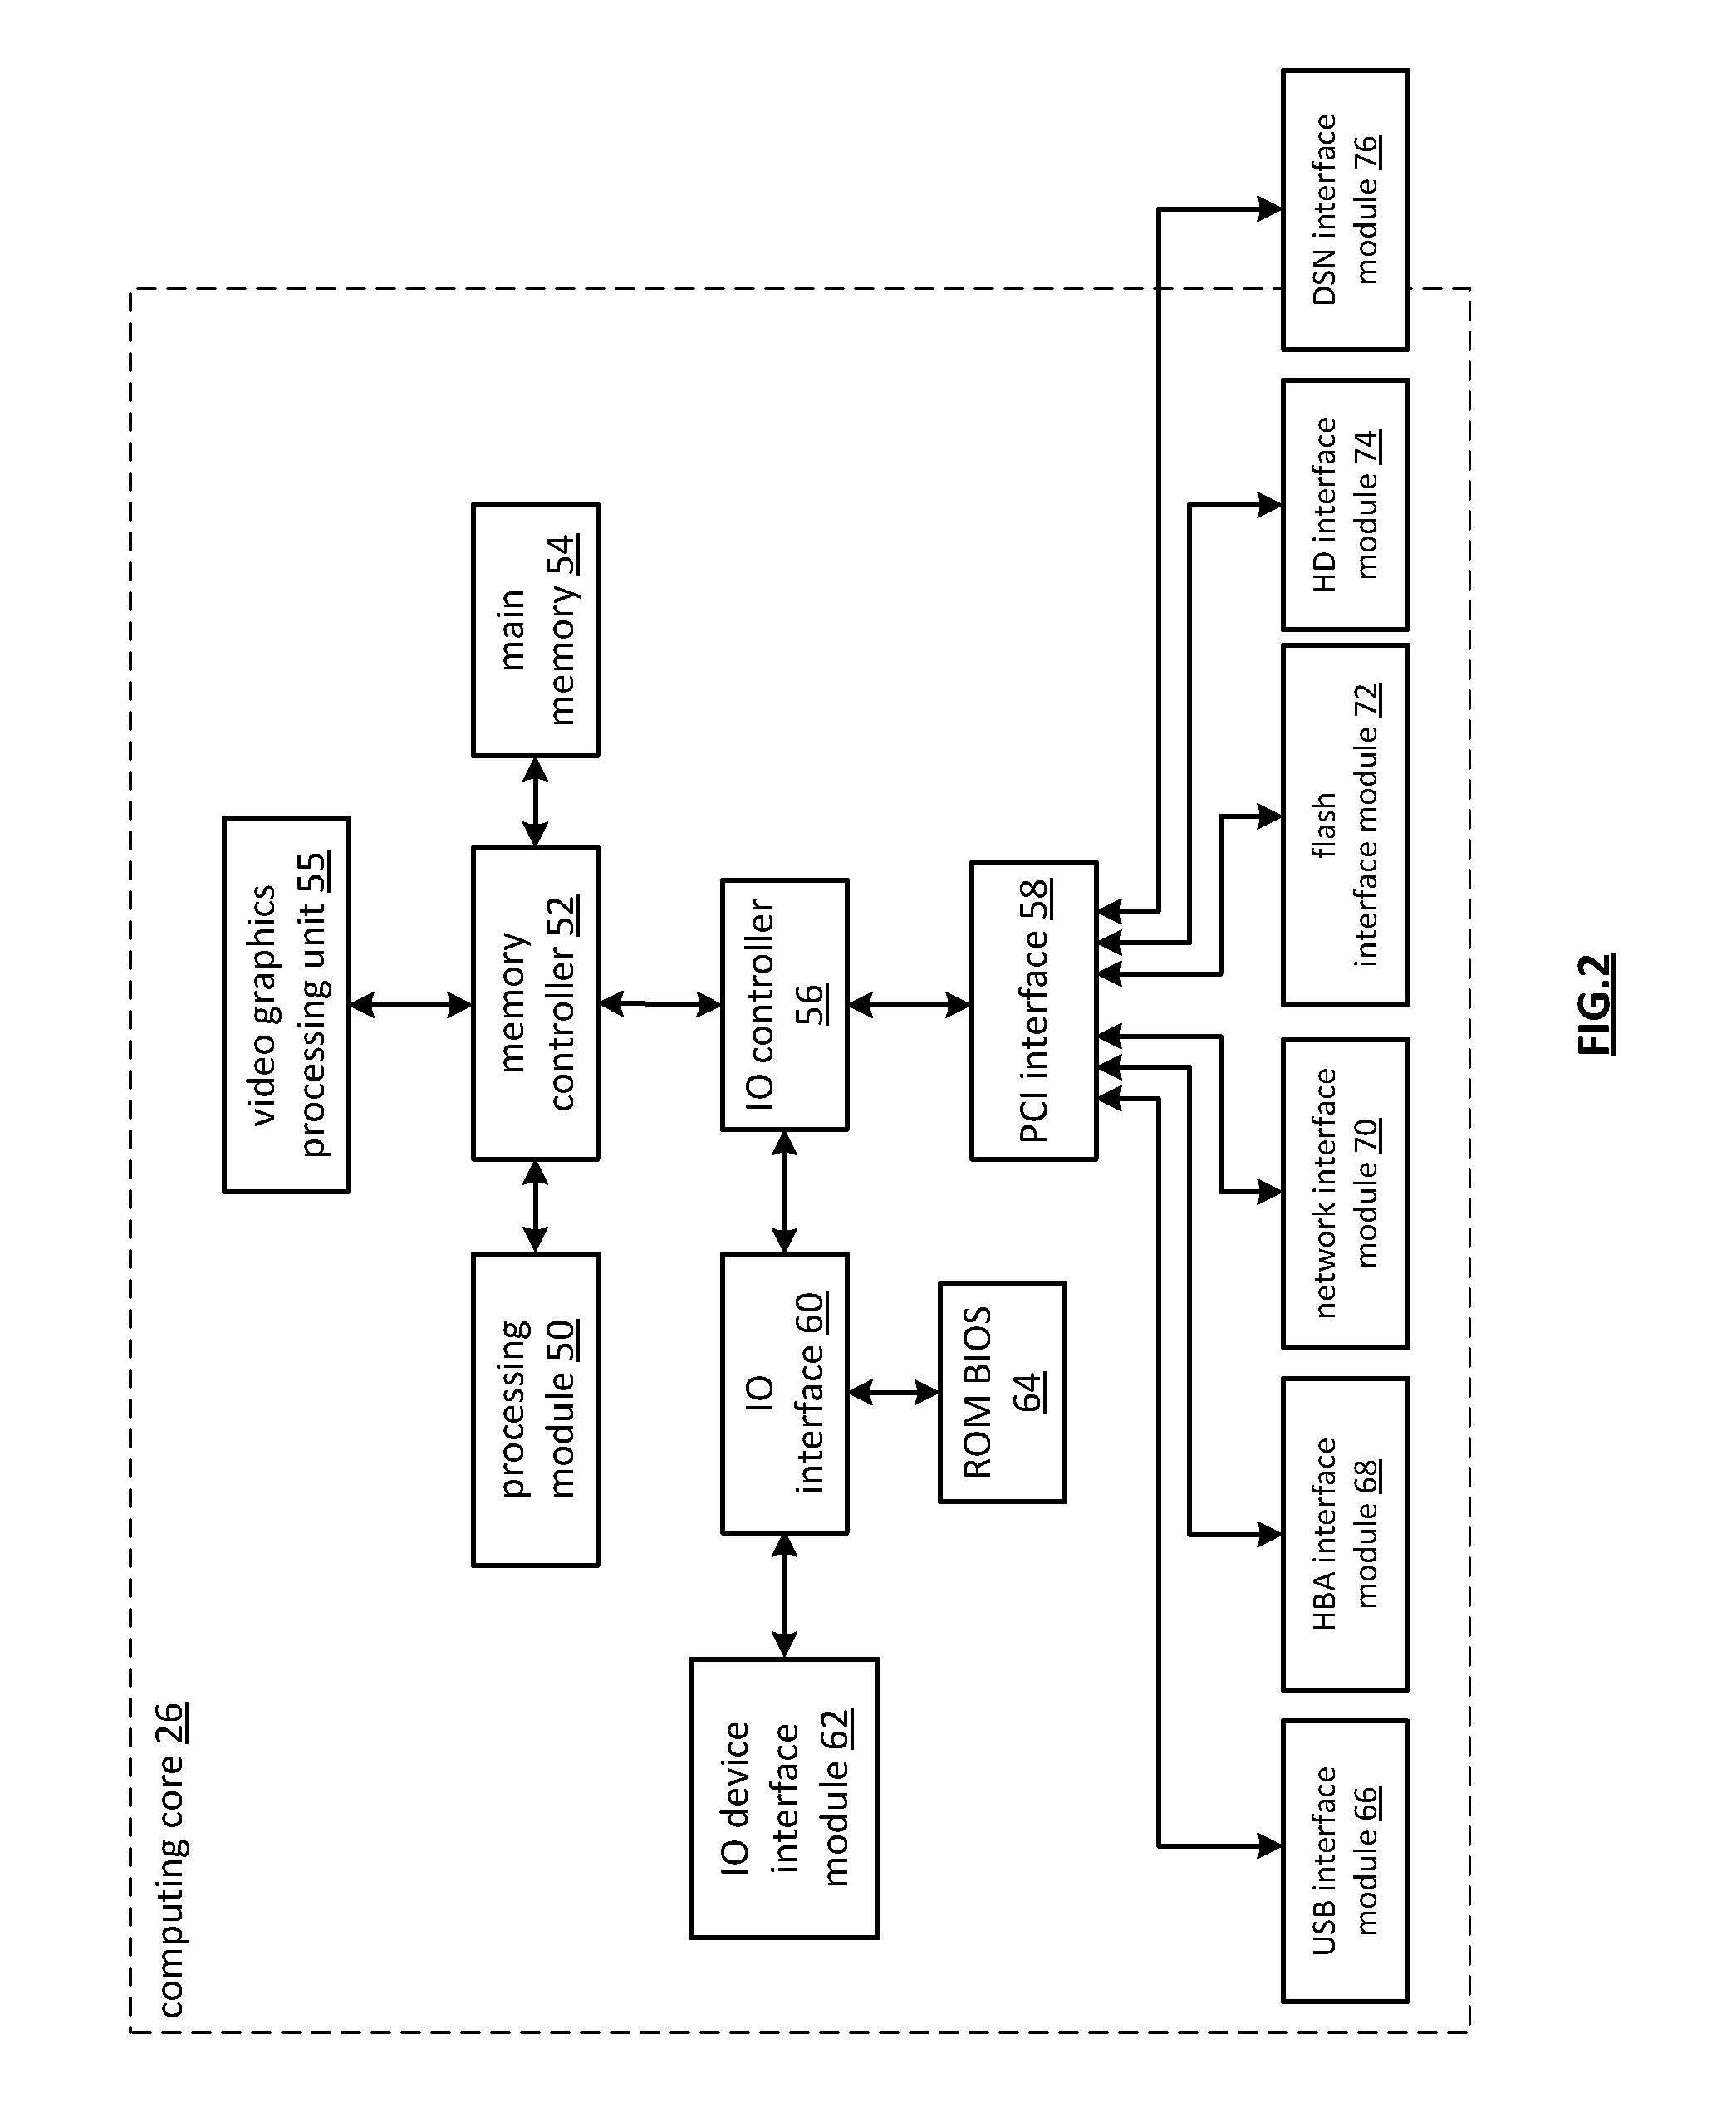 Distributed storage network and method for encrypting and decrypting data using hash functions